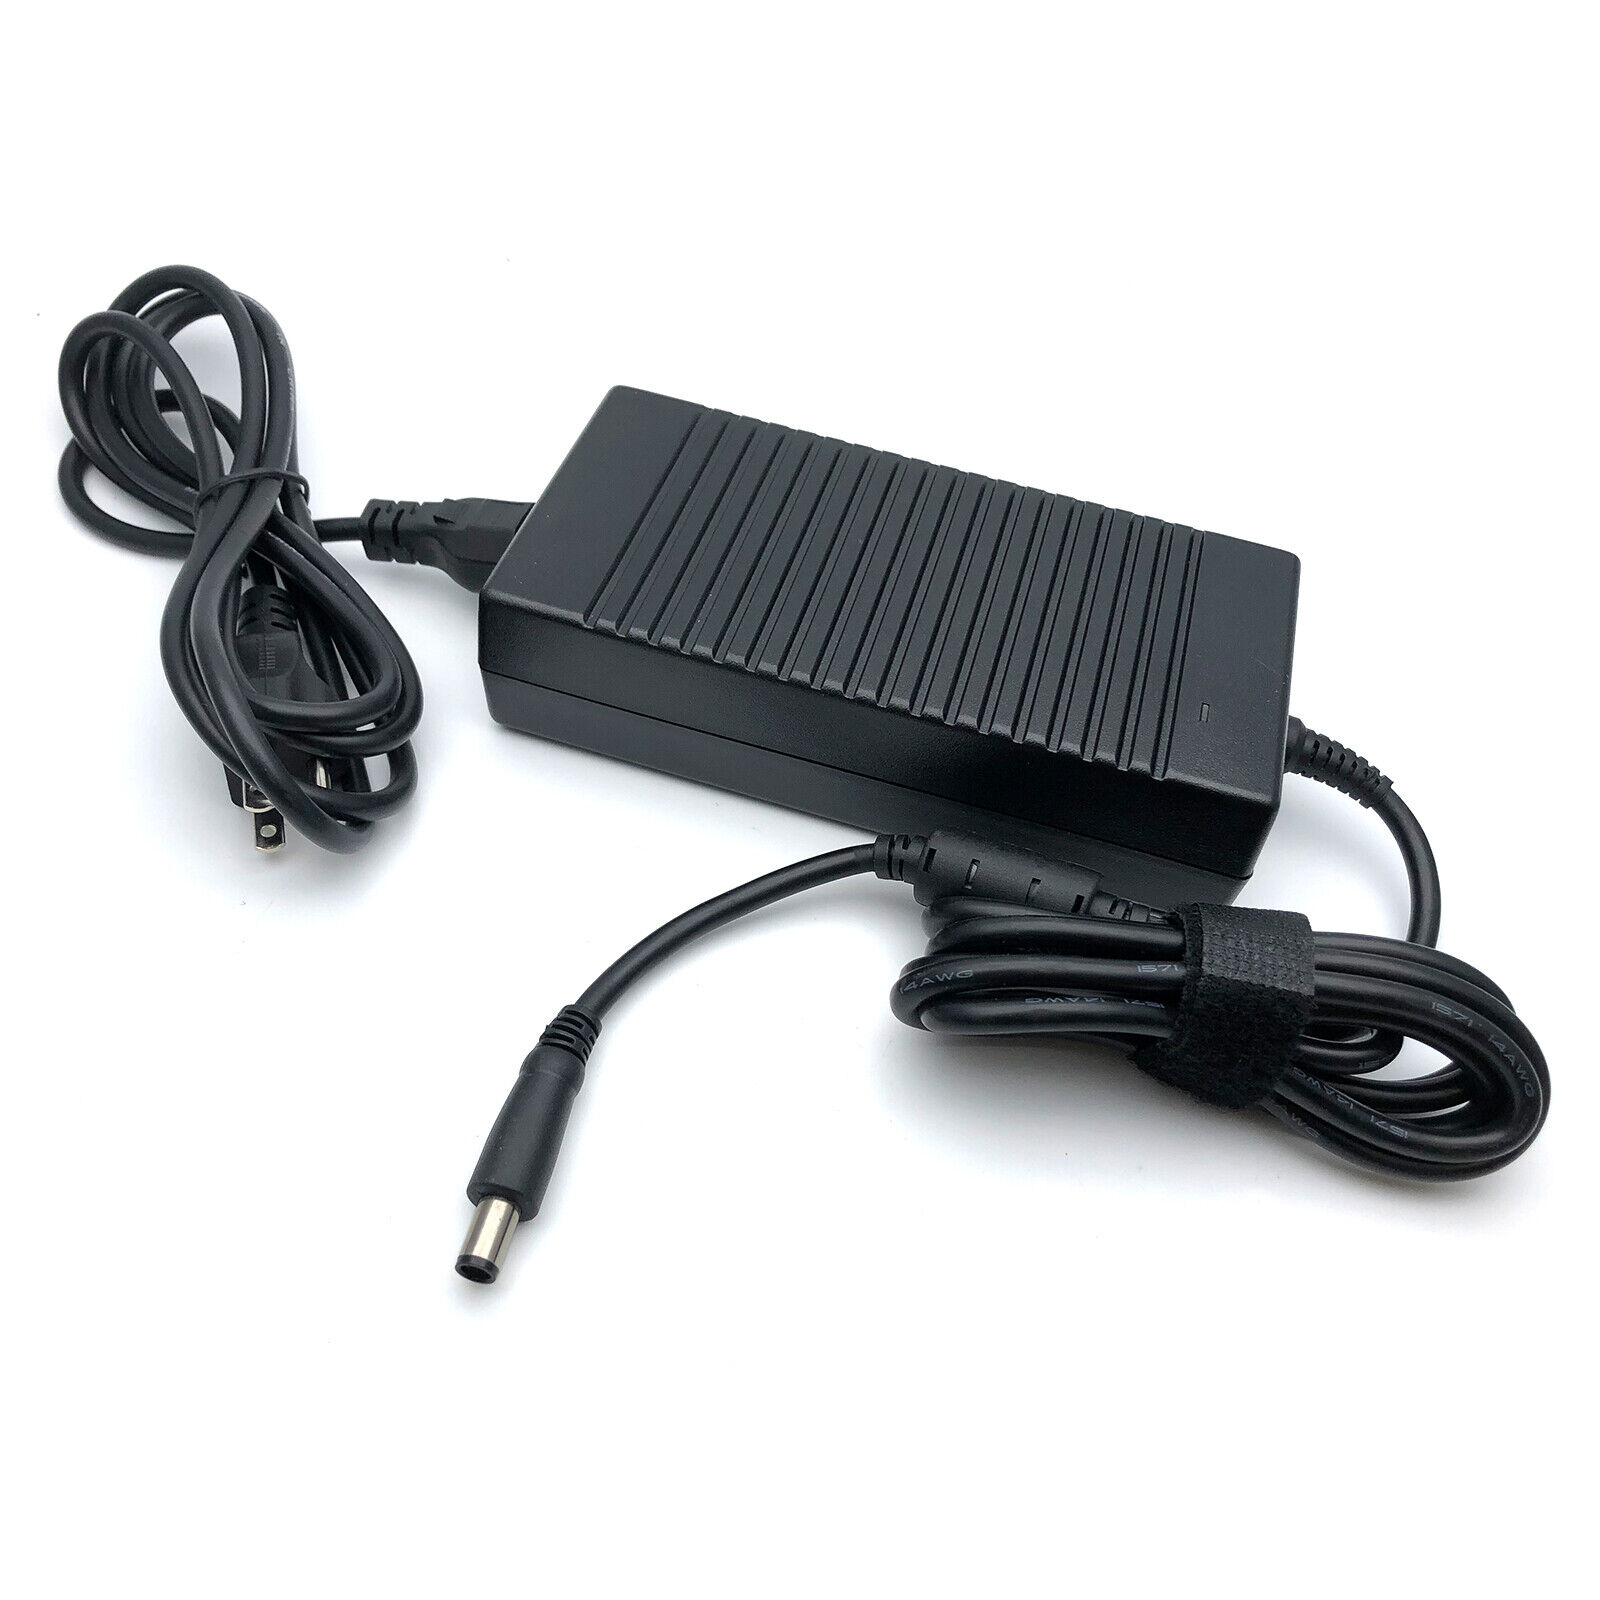 150W AC Adapter Cord Charger for Dell XPS M2010 Delta N426P Vostro 360 Power US